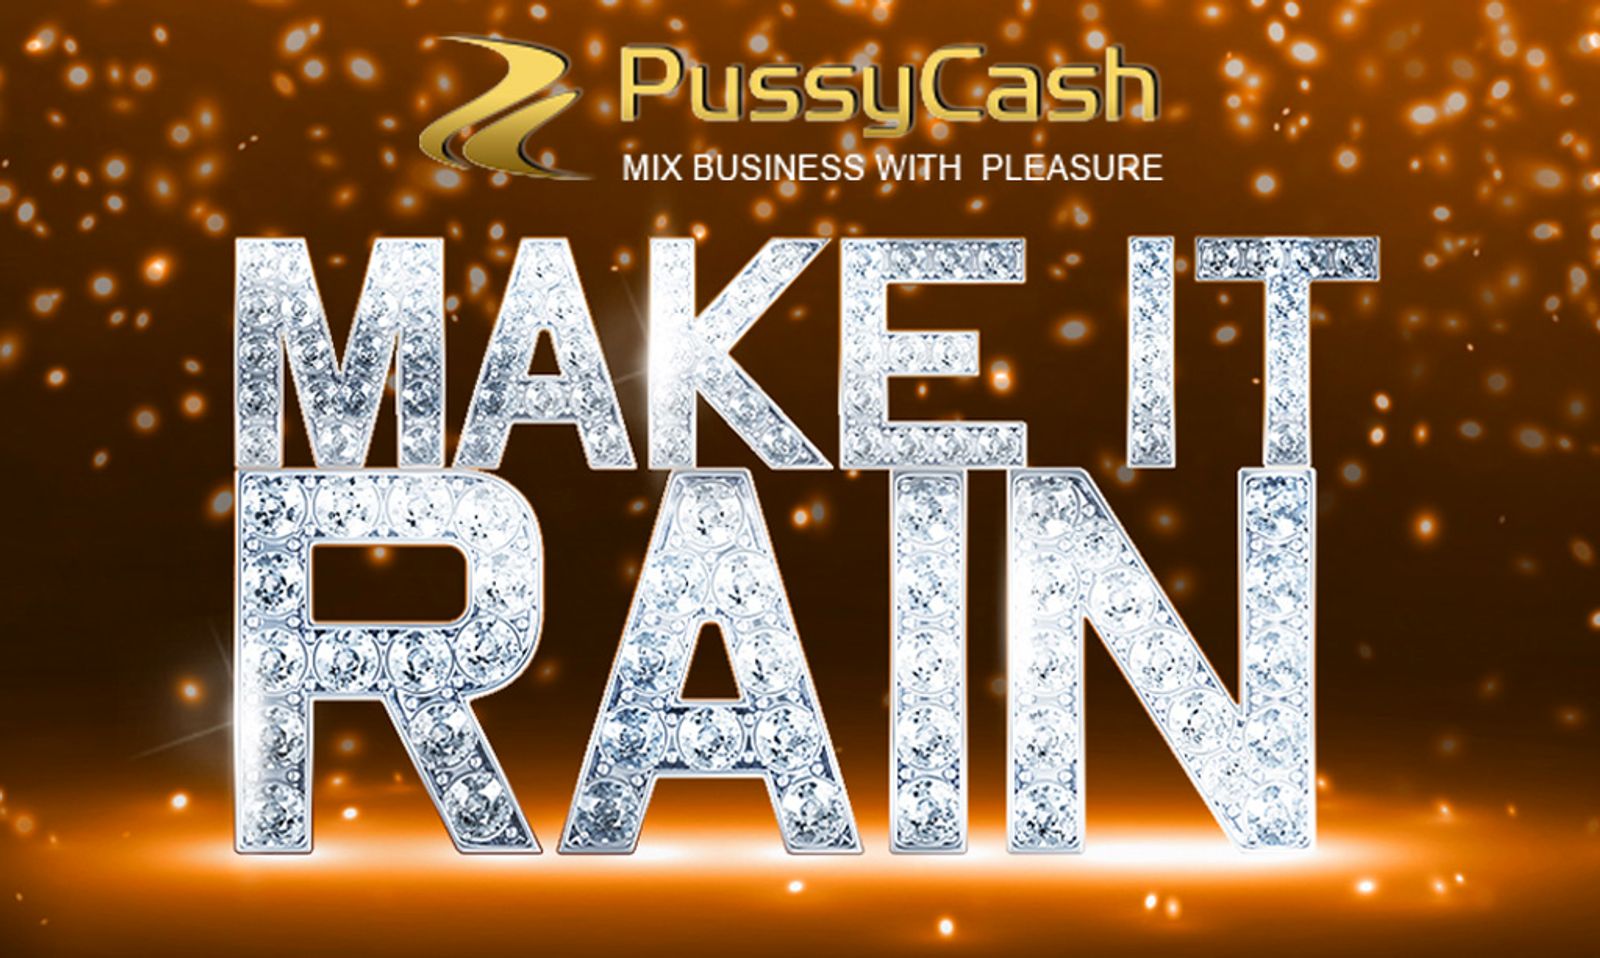 Pussycash to Give Away $10 Million to Affiliates